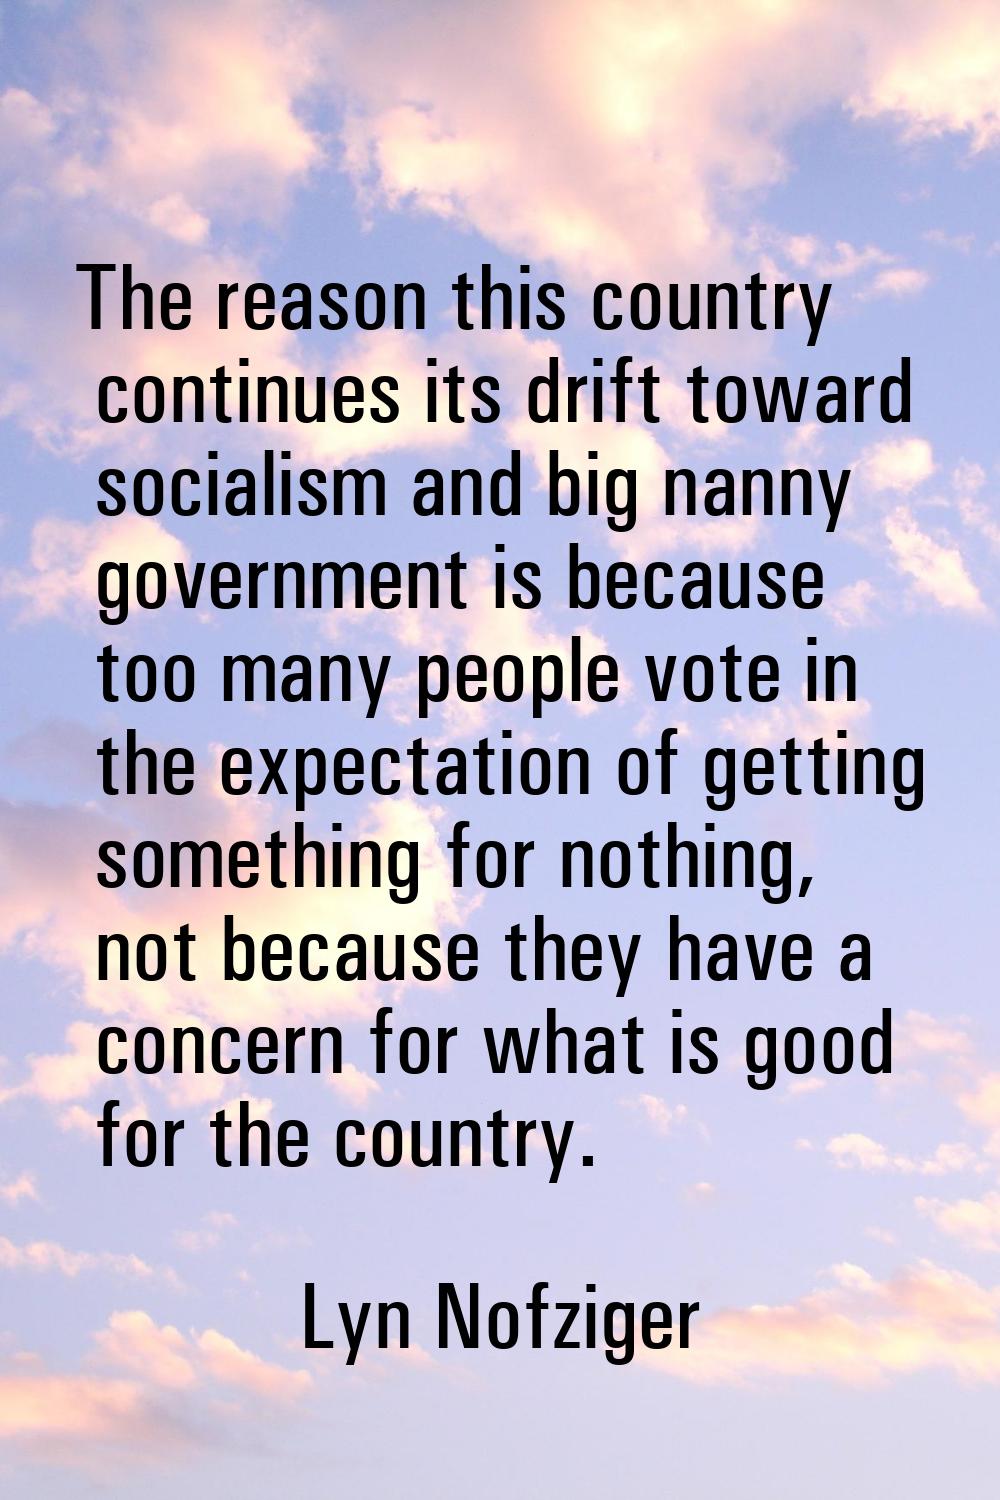 The reason this country continues its drift toward socialism and big nanny government is because to